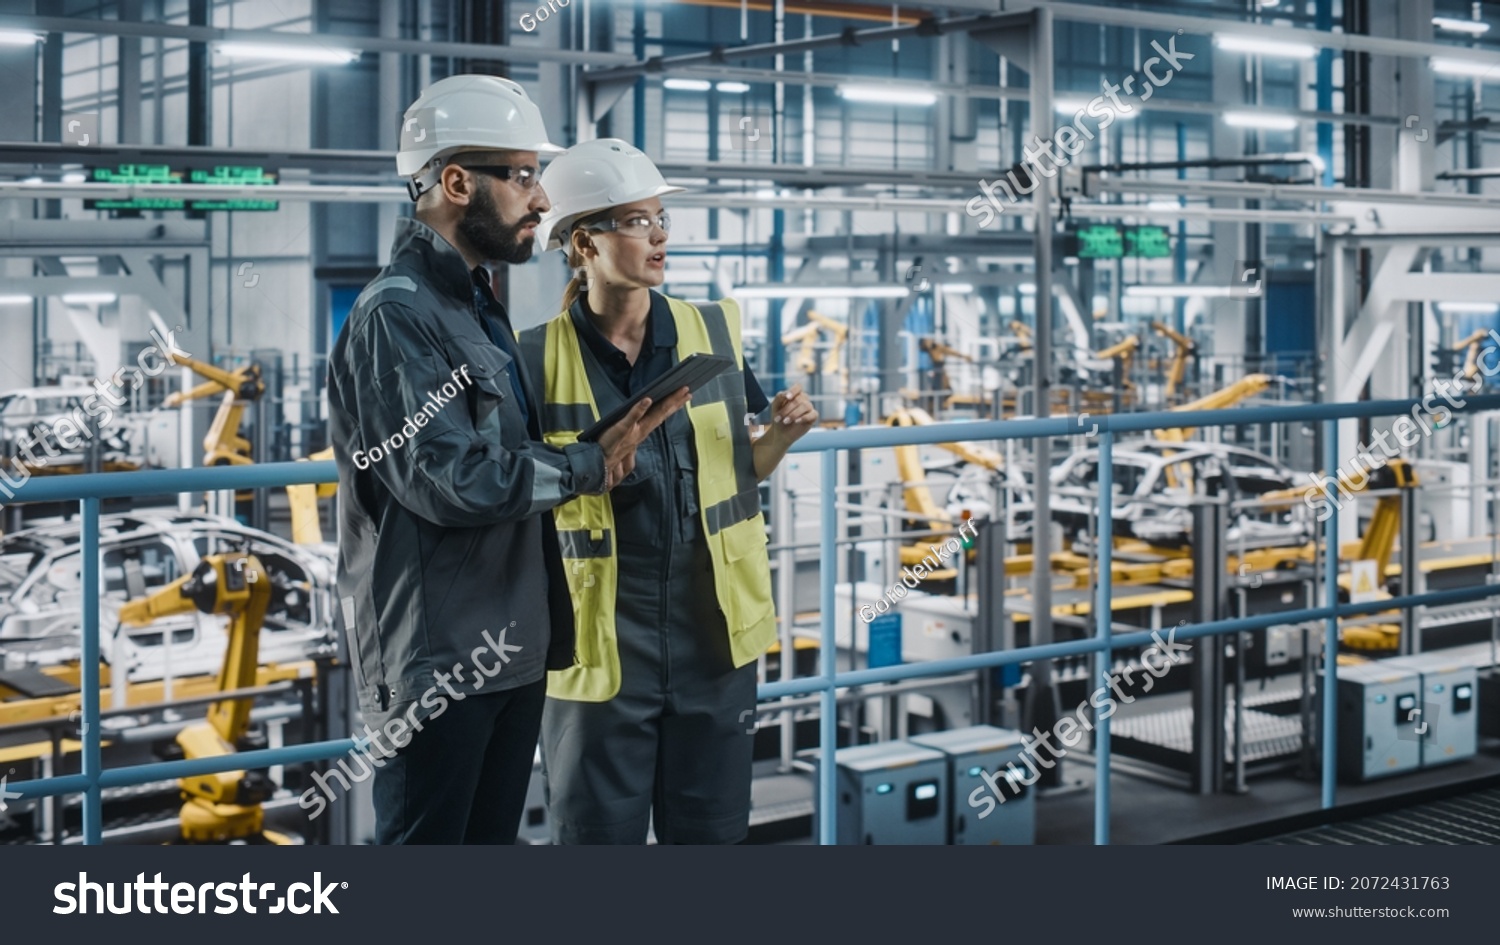 Male Specialist and Female Car Factory Engineer in High Visibility Vests Using Tablet Computer. Automotive Industrial Manufacturing Facility Working on Vehicle Production. Diversity on Assembly Plant. #2072431763